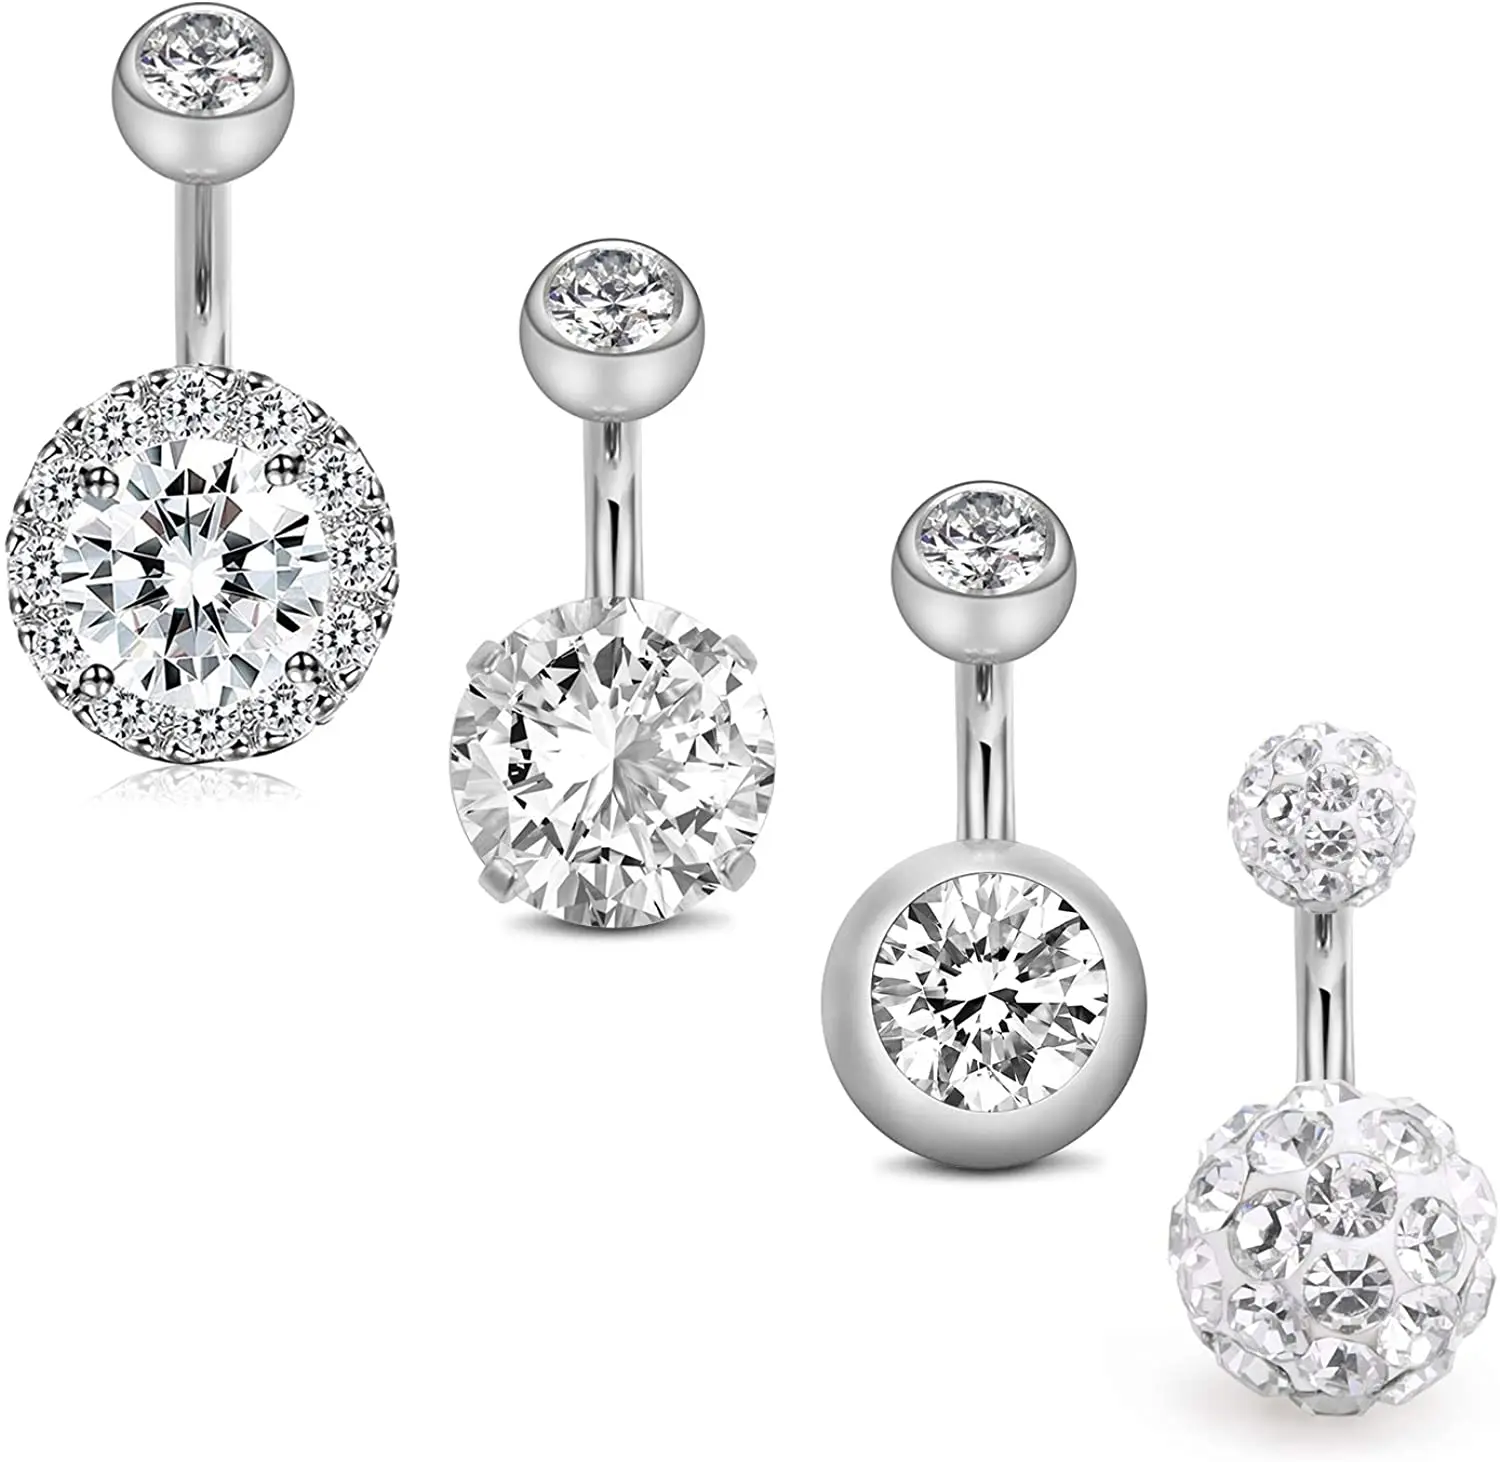 E:10Pcs,Silver-Tone JOERICA 3-6PCS 14G Stainless Steel Belly Button Rings Navel Body Jewelry Belly Piercing CZ Inlaid 